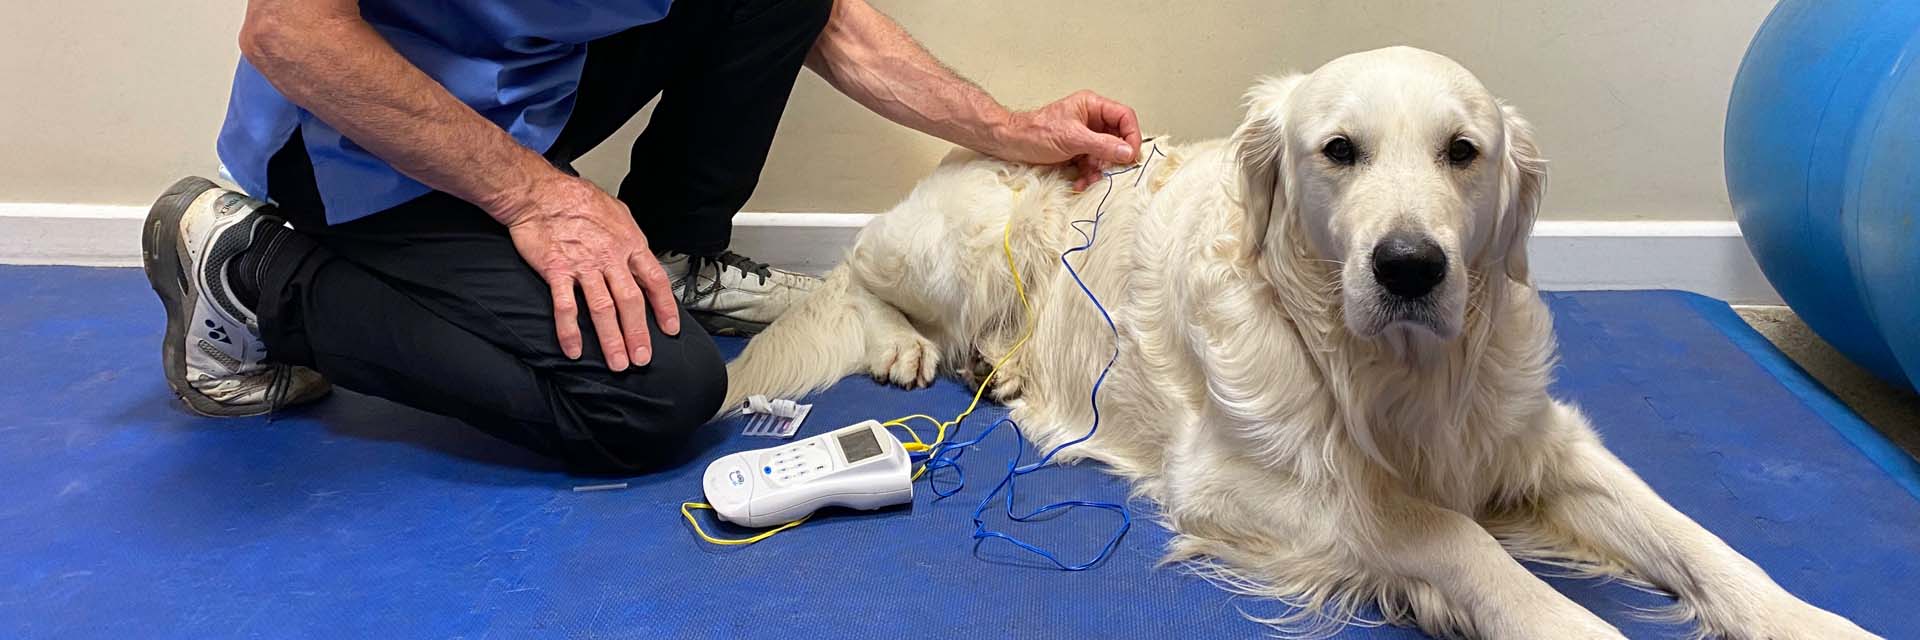 Dog having acupuncture at Fitzpatrick Referrals